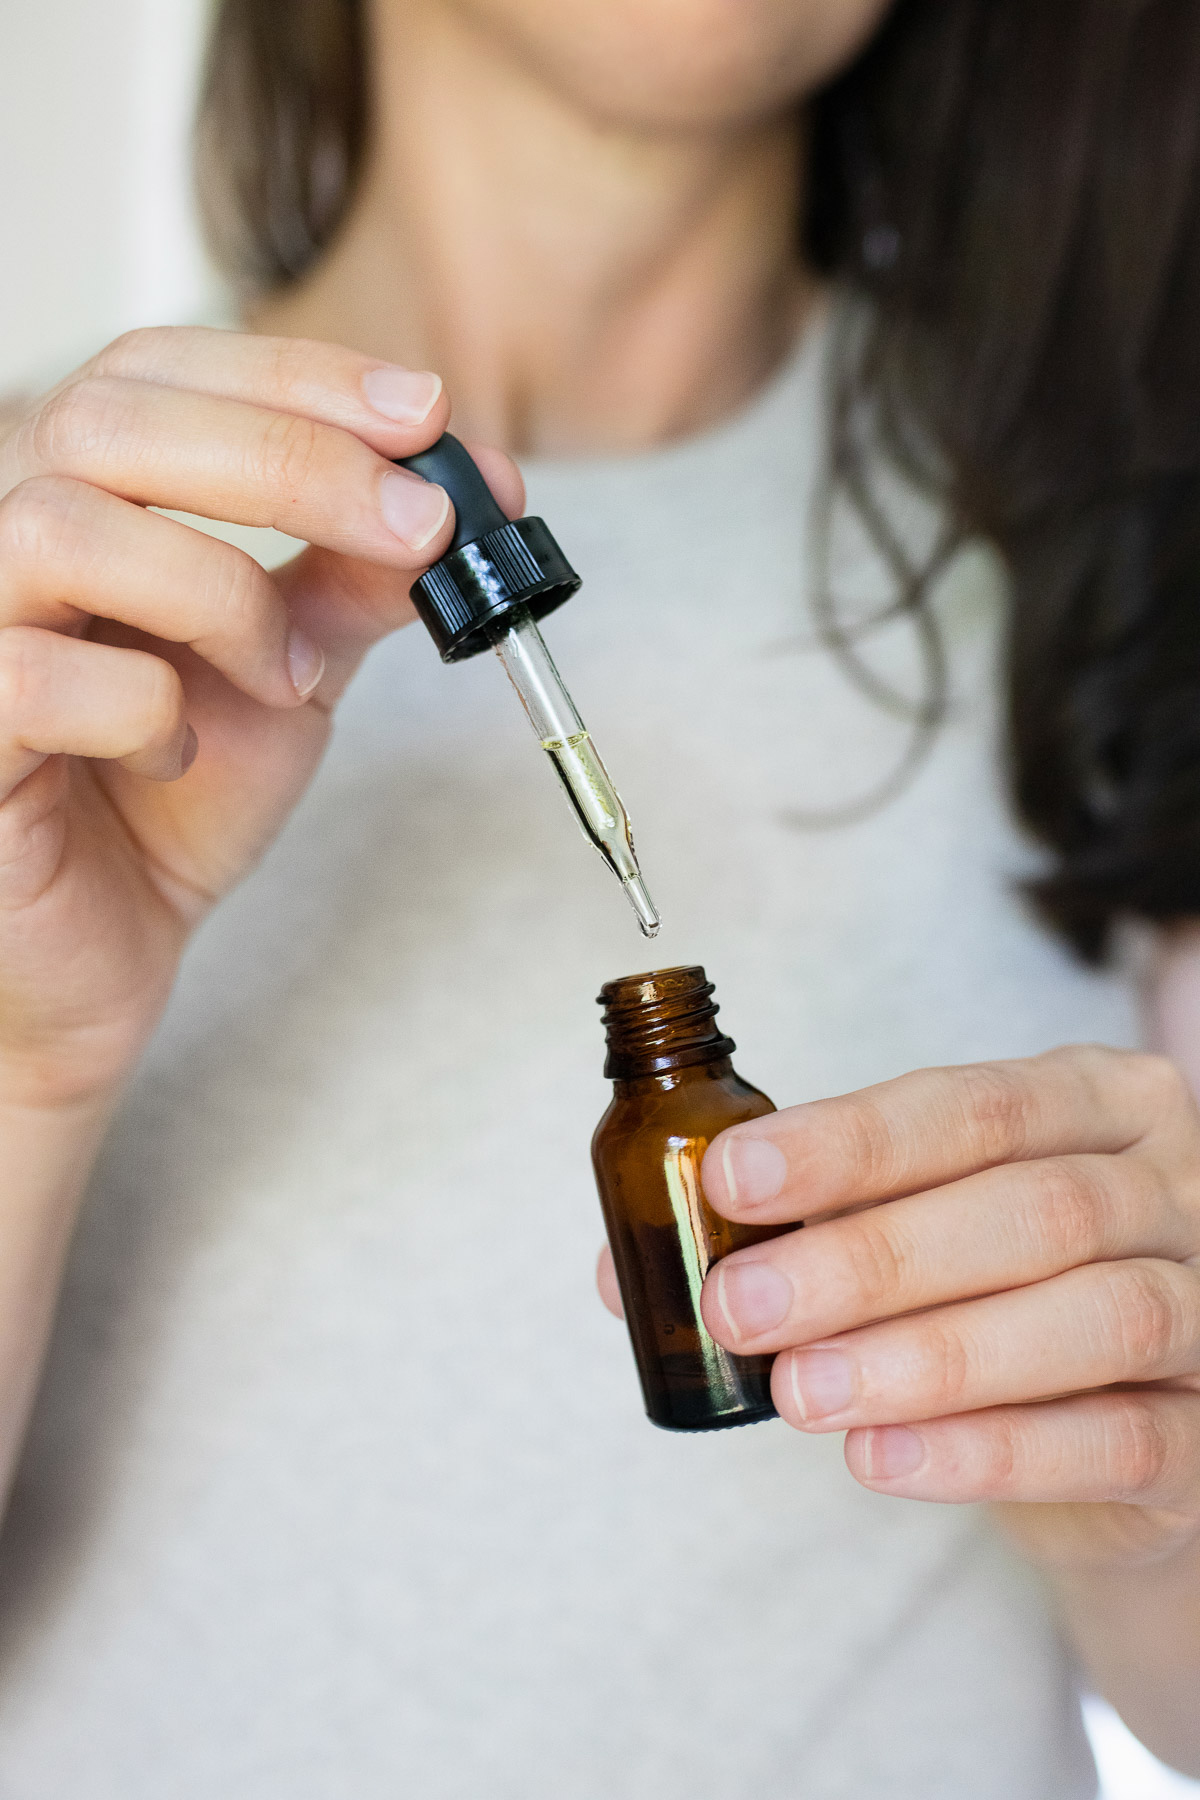 How to use tea tree oil for hair and scalp health